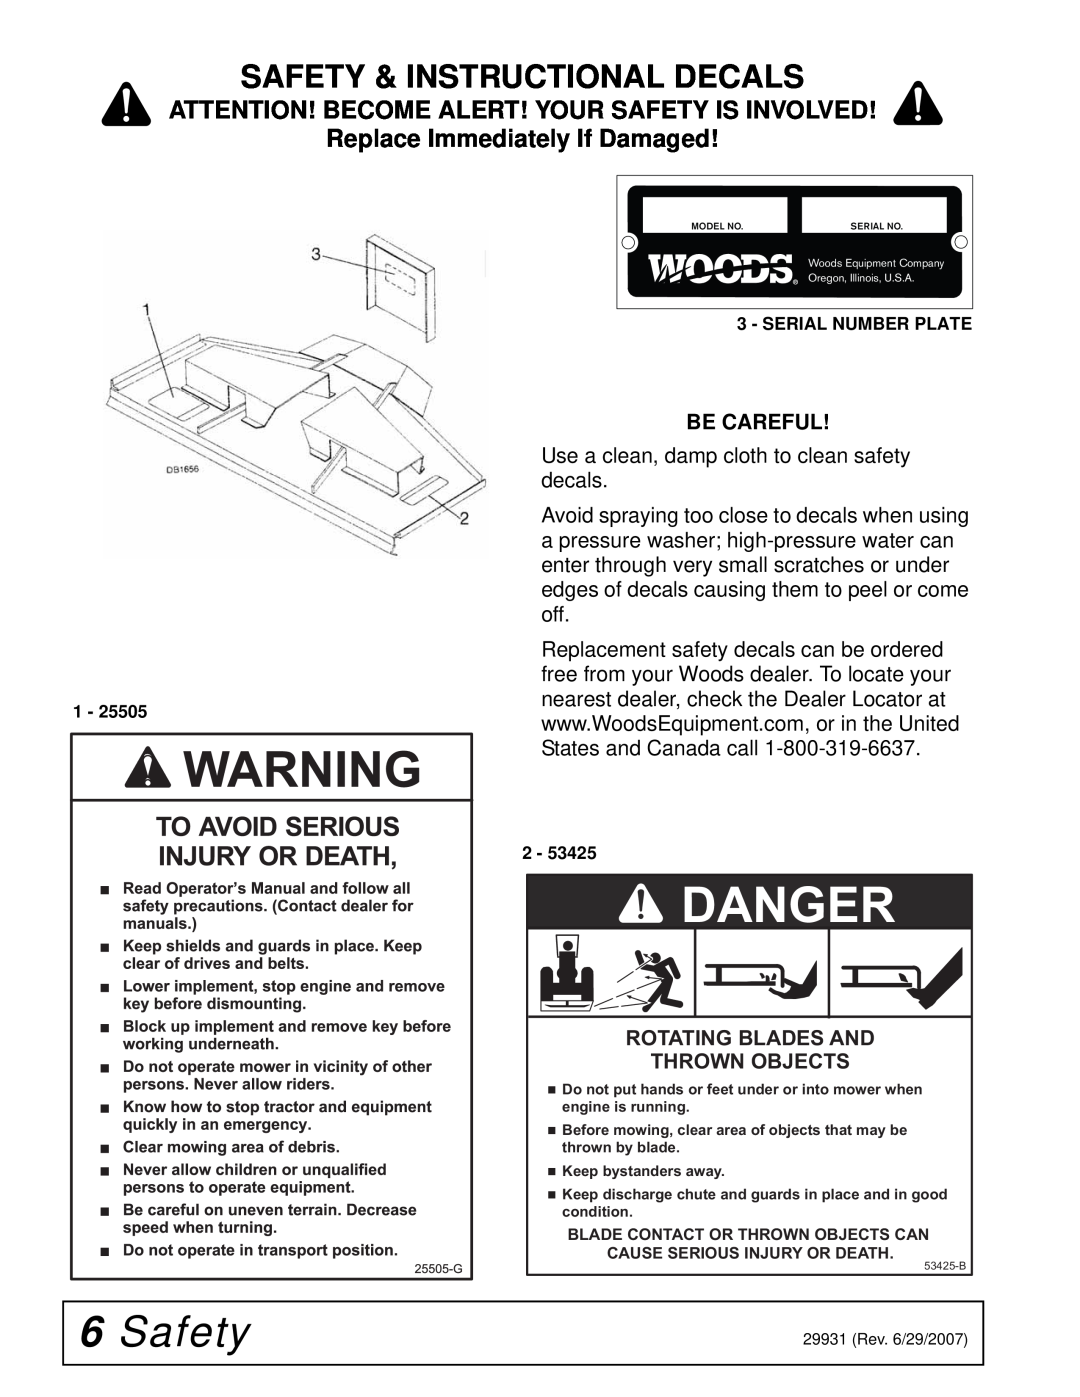 Woods Equipment 59HC-1 manual Safety & Instructional Decals, Replace Immediately If Damaged, Be Careful, Danger 